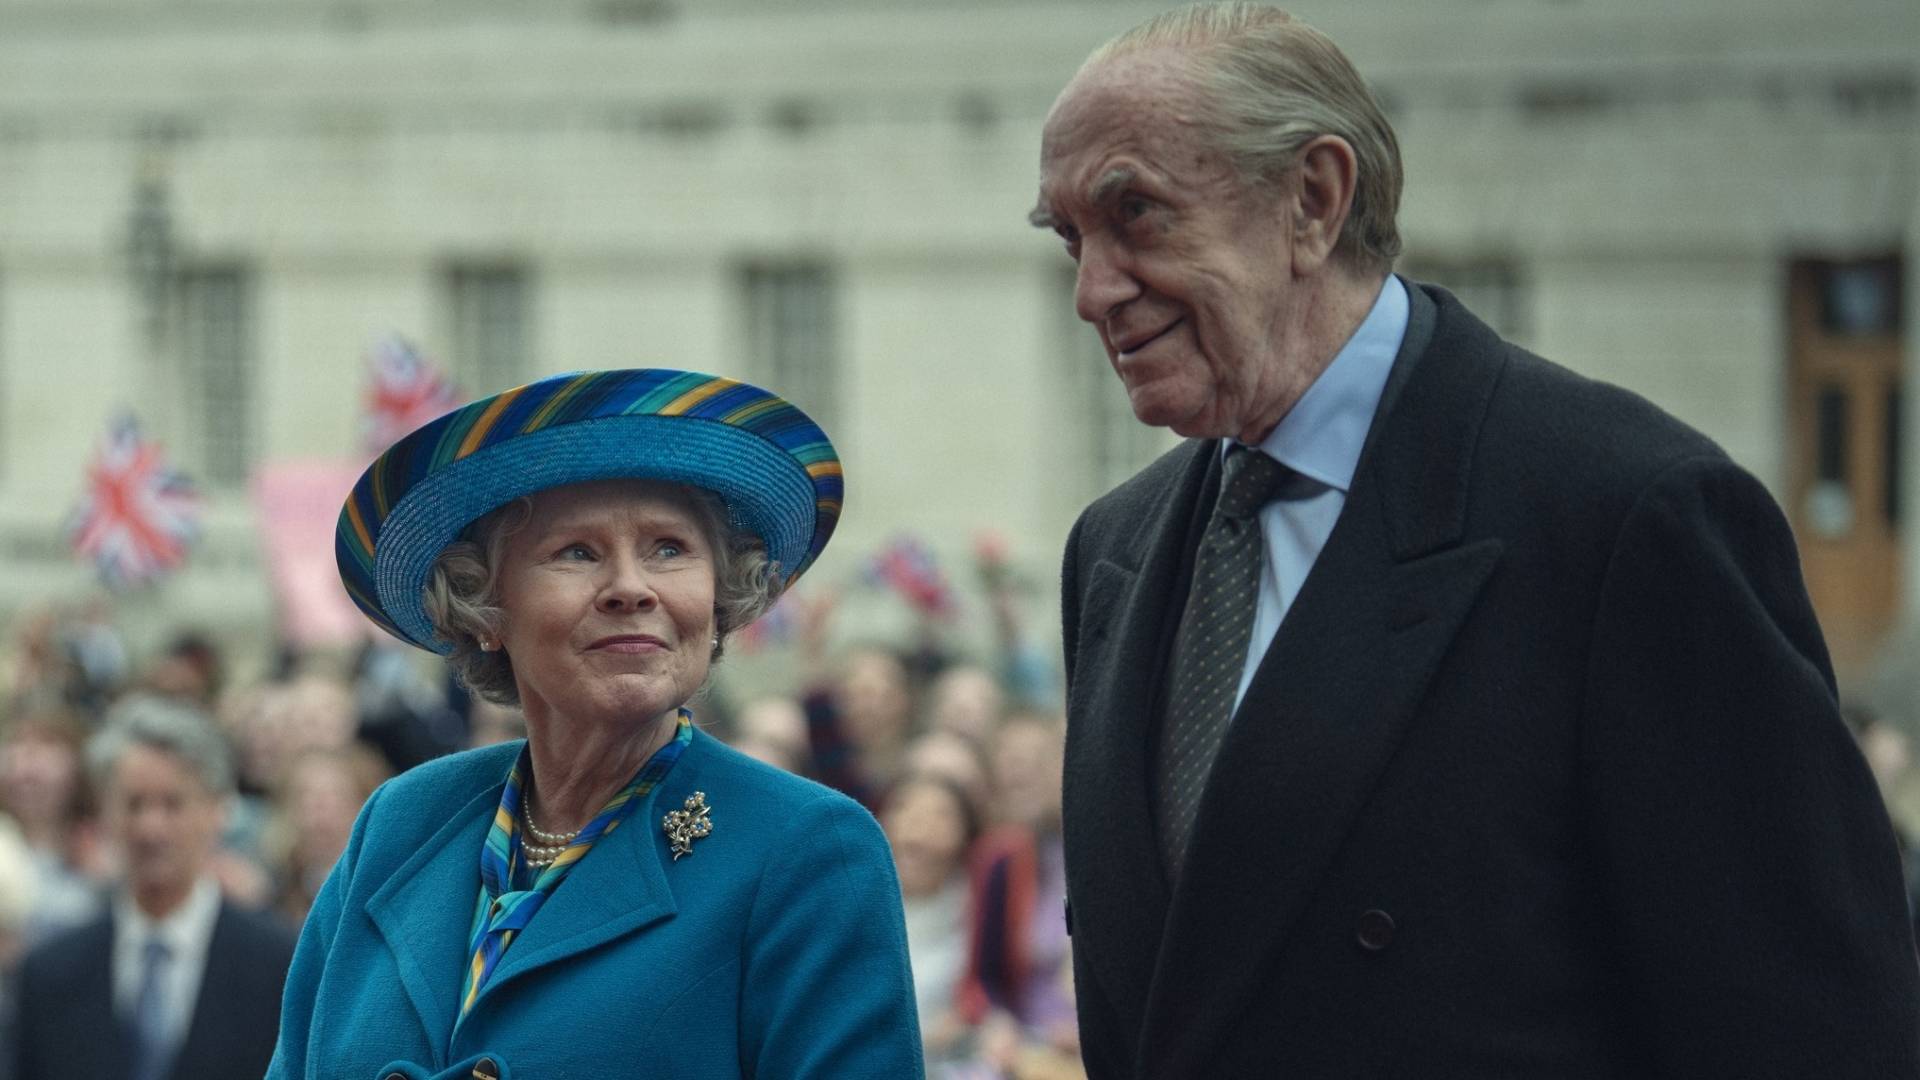 An elderly woman in a blue suit and matching hat looks up fondly at an elderly man in a suit.